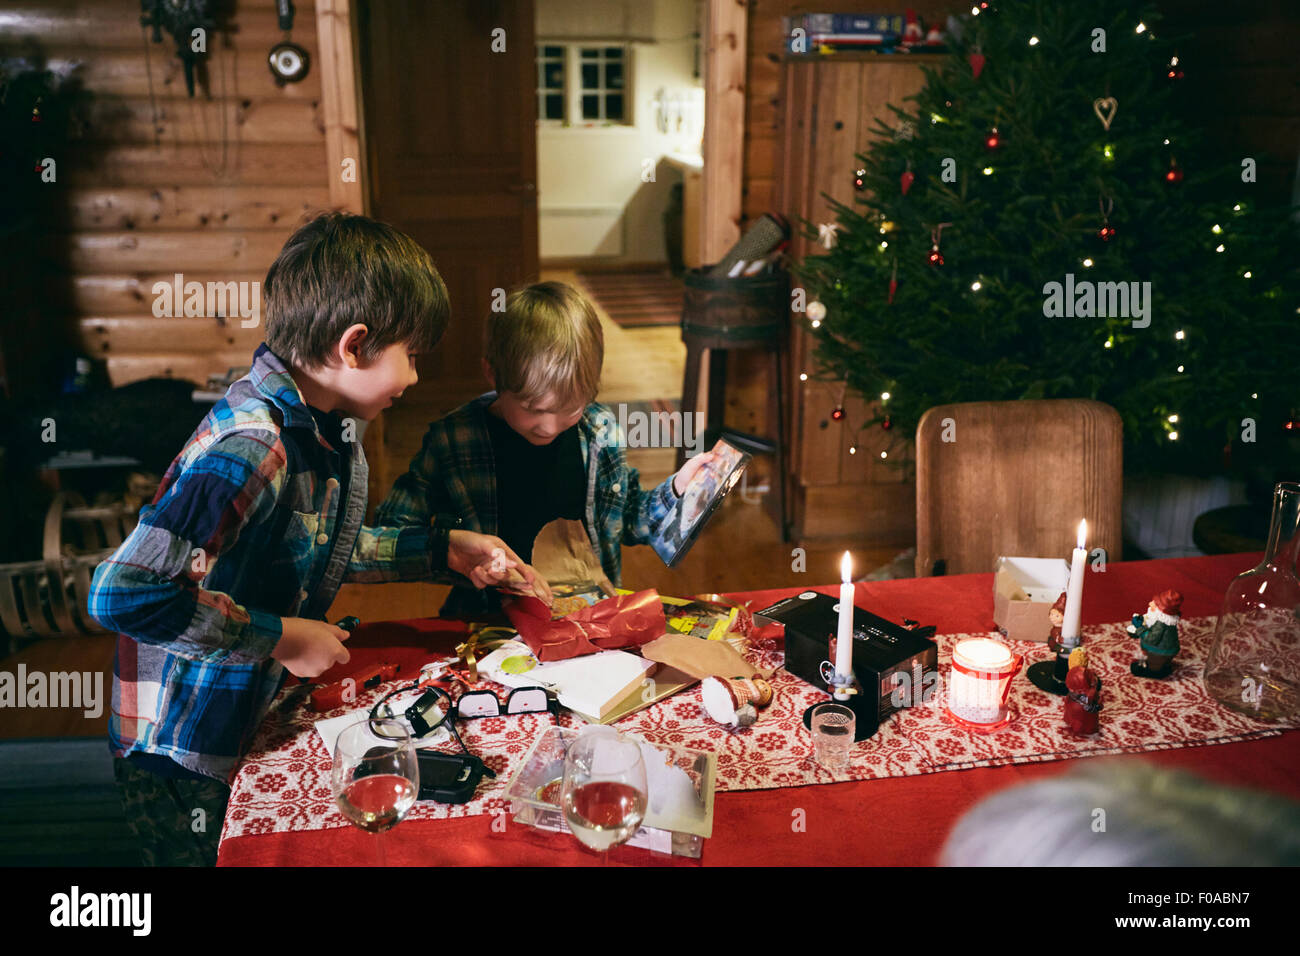 Two brothers opening Christmas presents at table Stock Photo